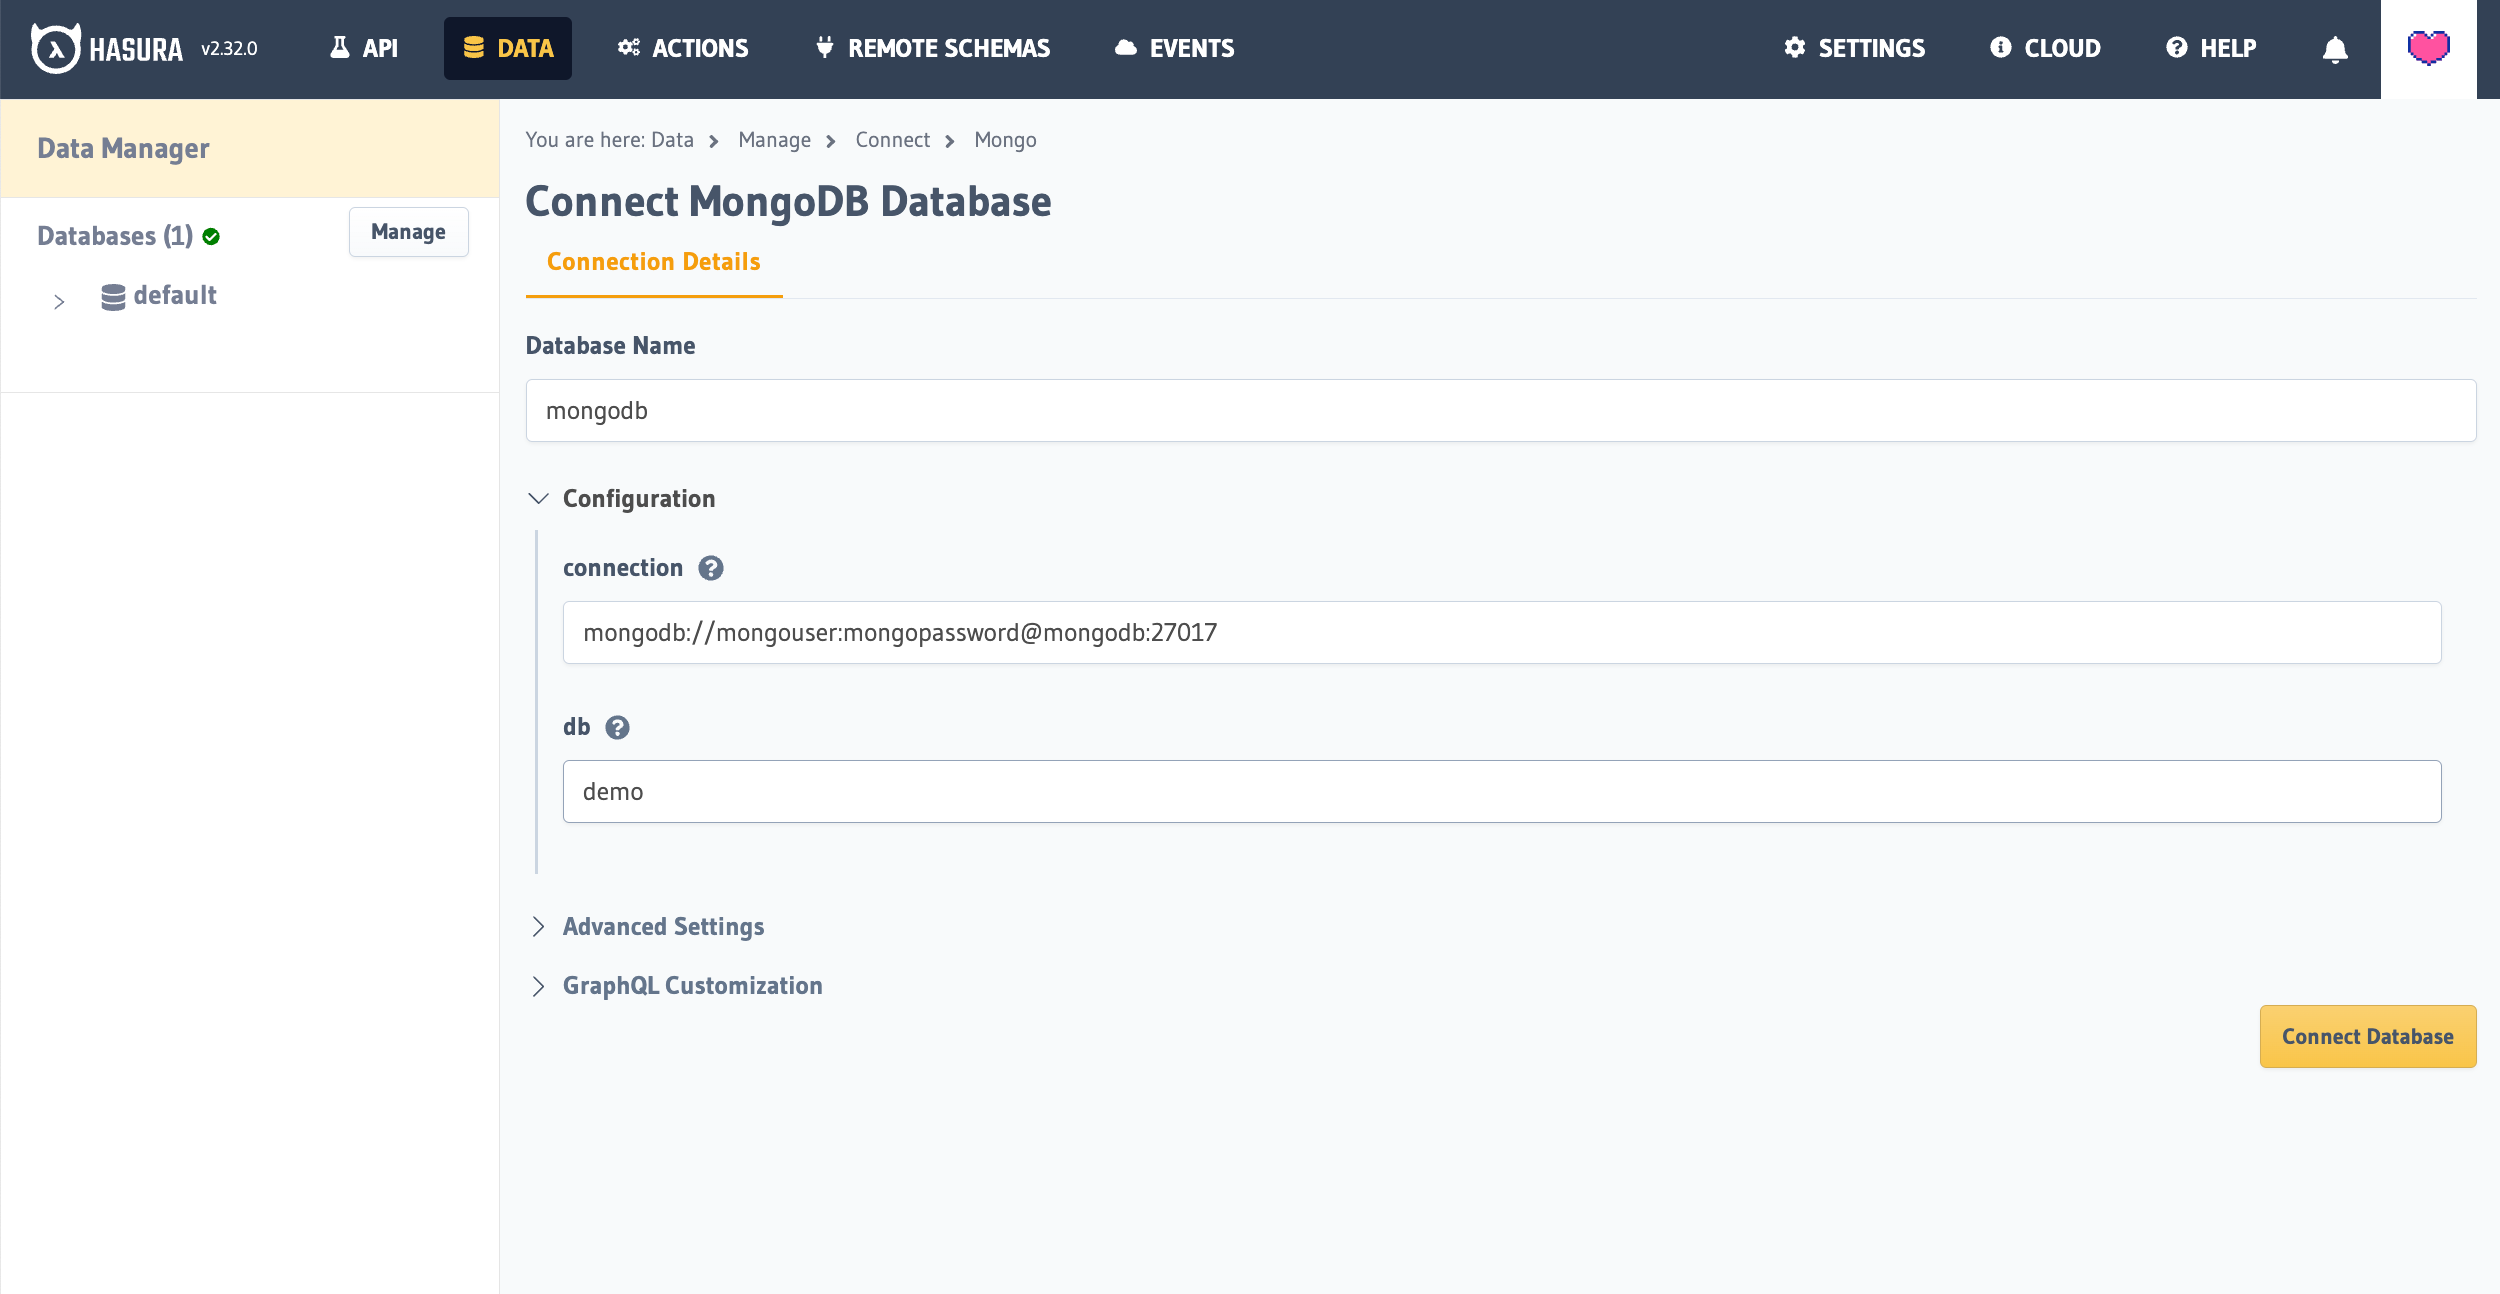 Connecting to MongoDB - Connecting your database